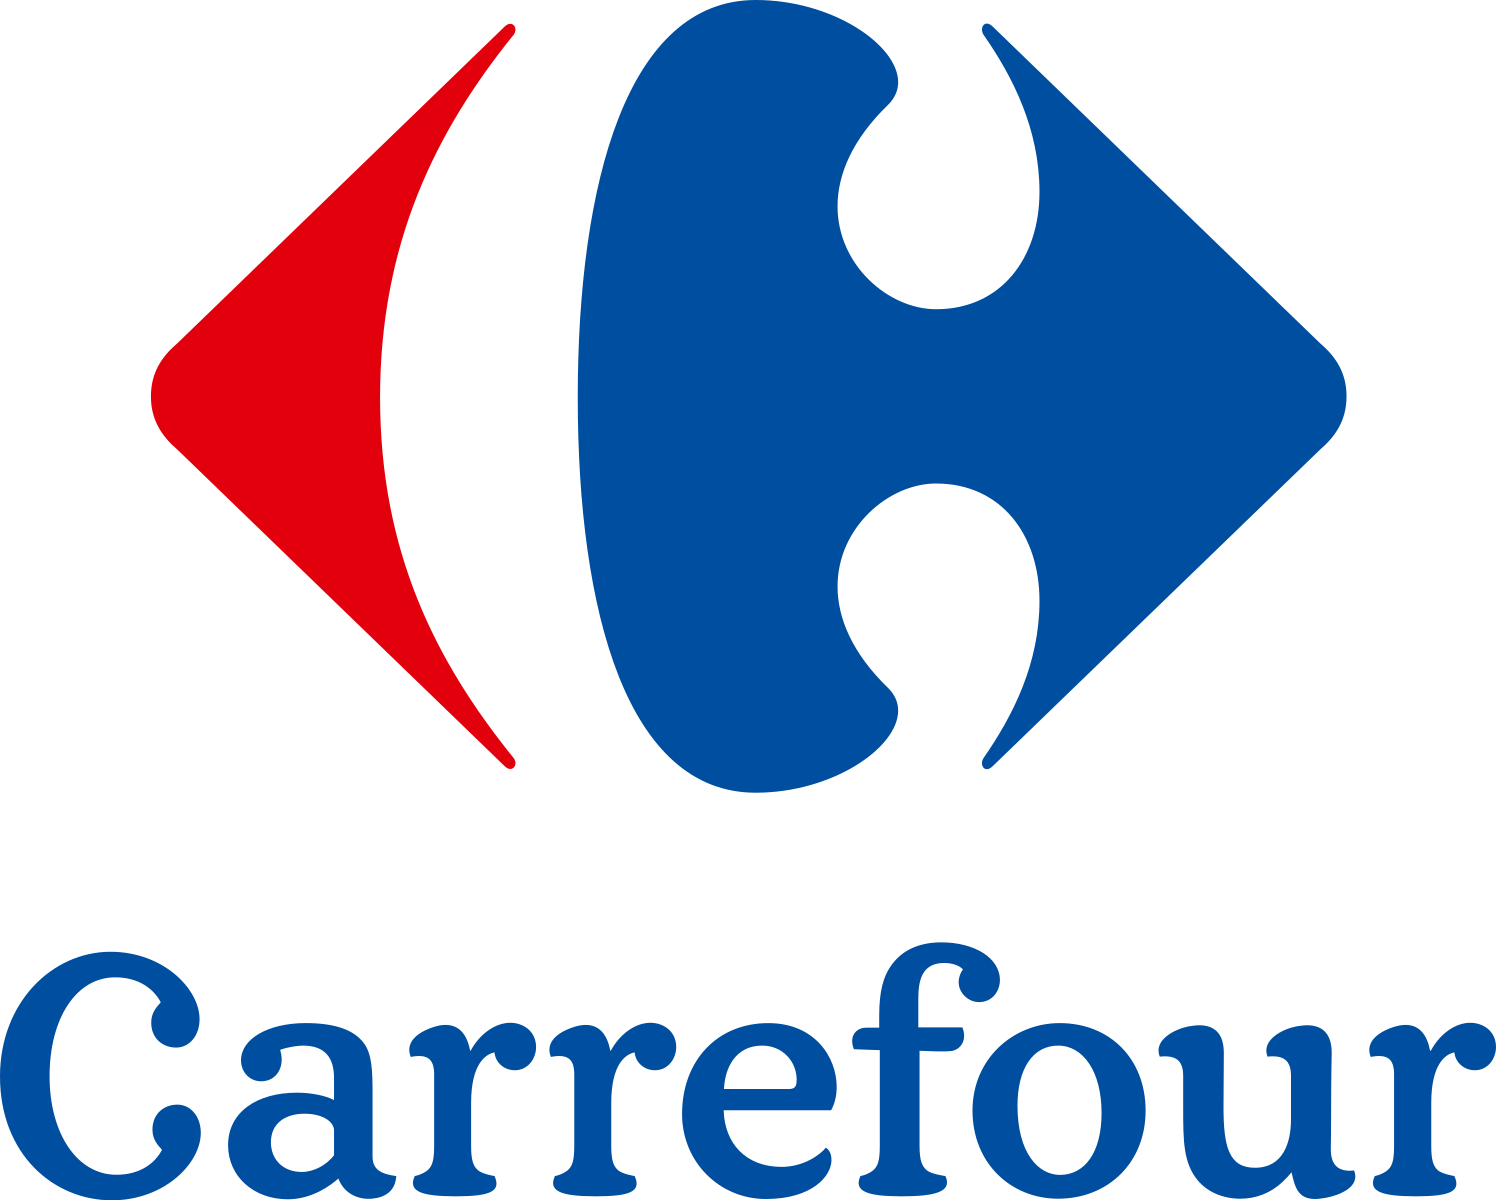 Information System of Groupe Carrefour